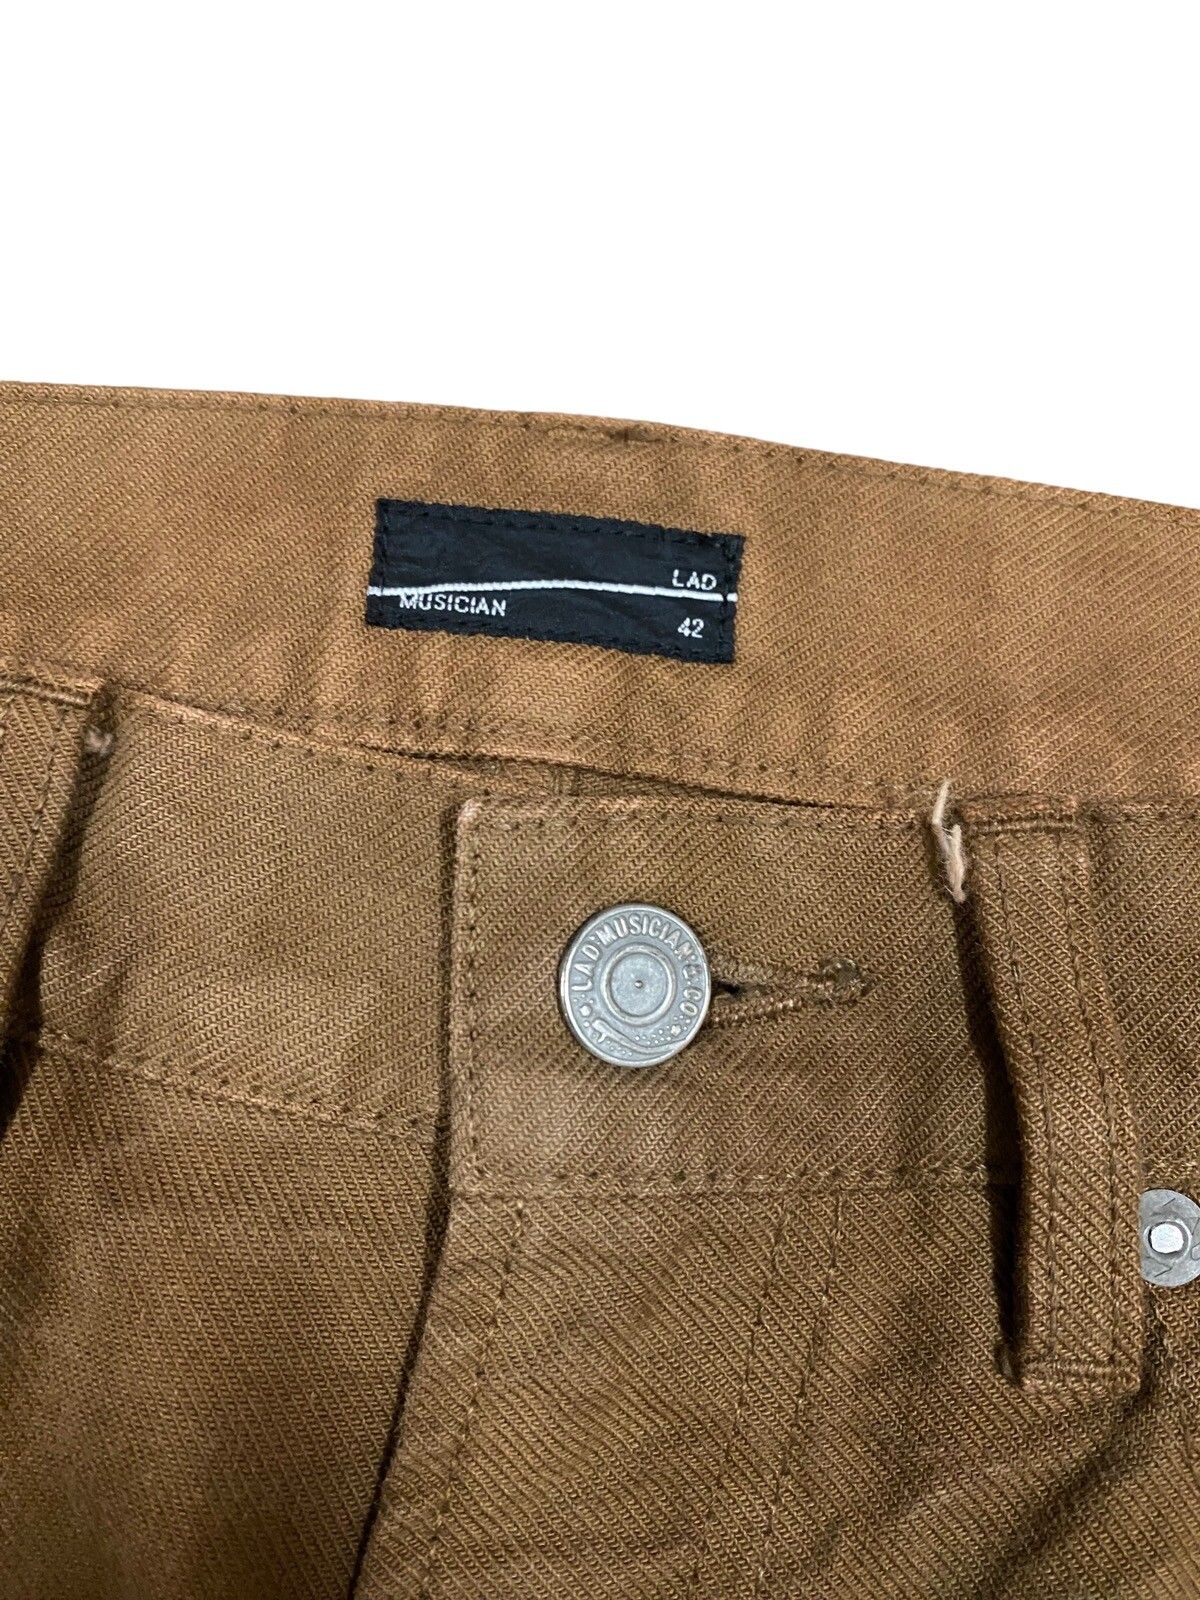 Lad Musician Brown Straight Cup Jeans Made In Japan - 10